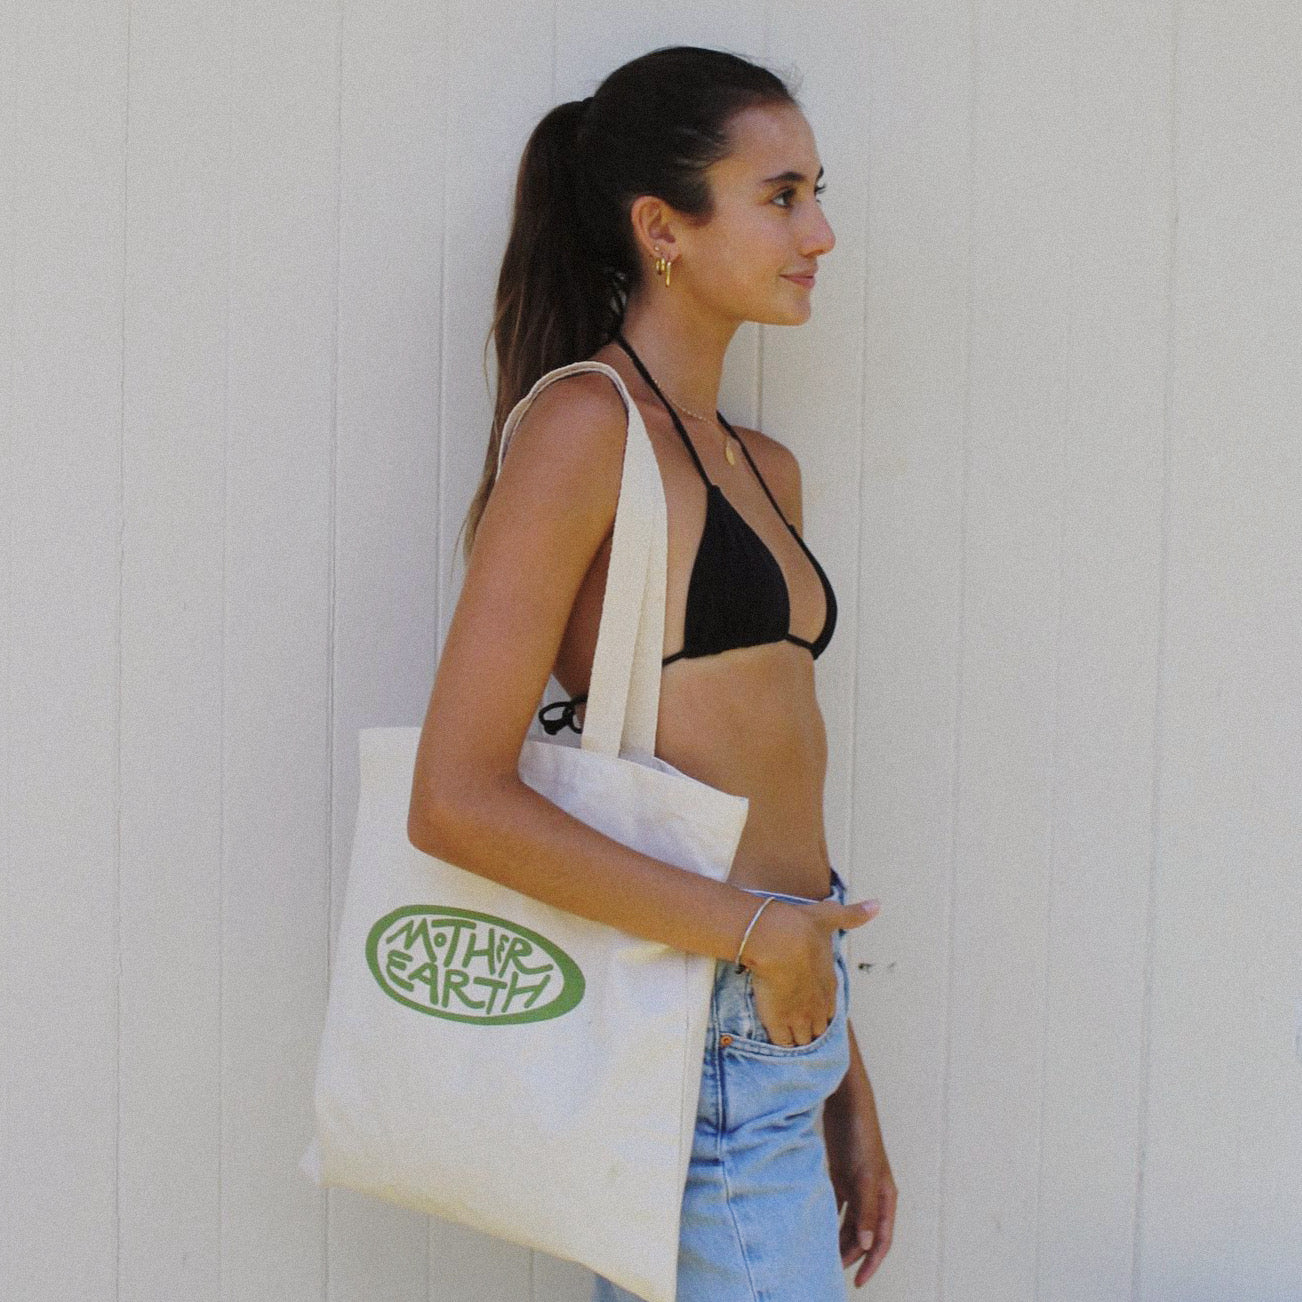 MOTHER EARTH TOTE BAG